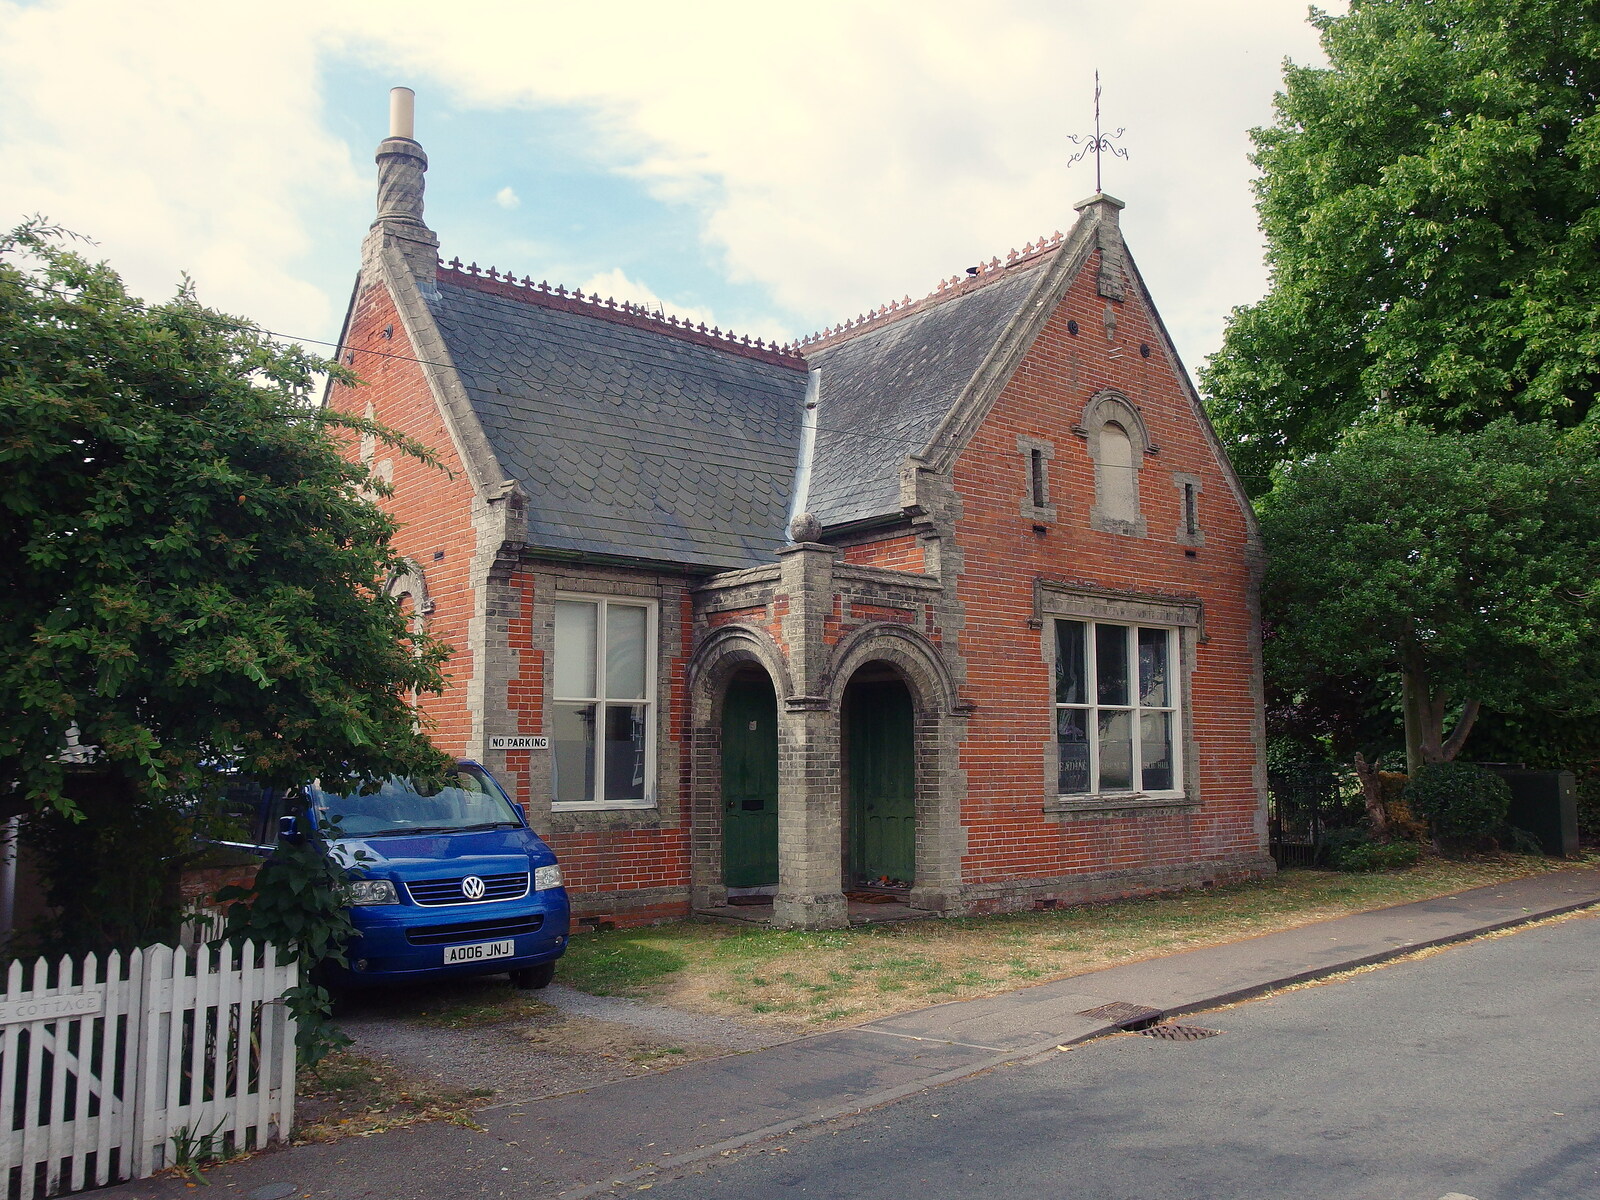 The old Reading Rooms in Walsham from A Ride to Walsham Le Willows, Suffolk - 15th July 2022